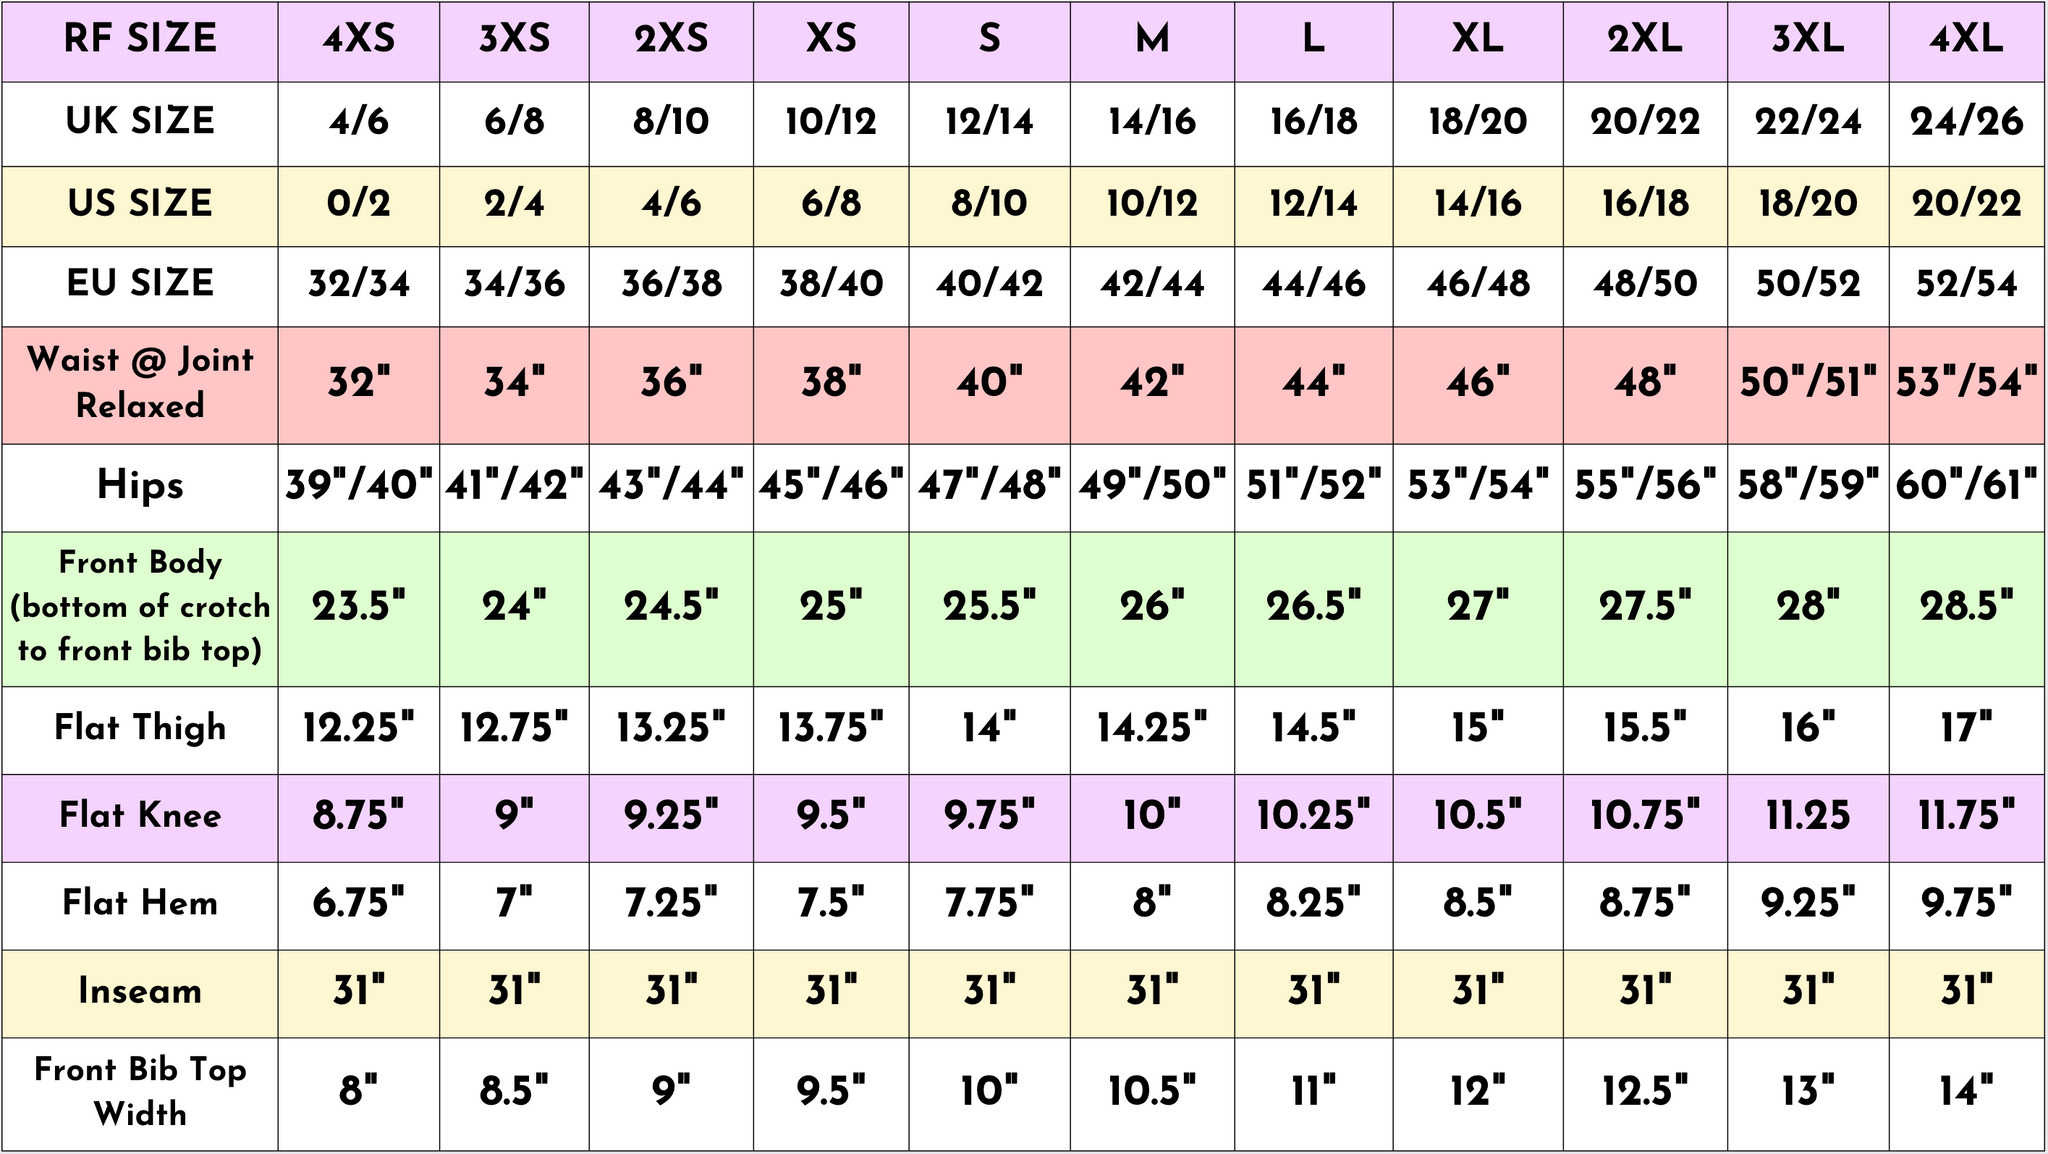 Size chart size guide measurements in inches of the some bunny loves you stretch twill dungarees by Run and fly.